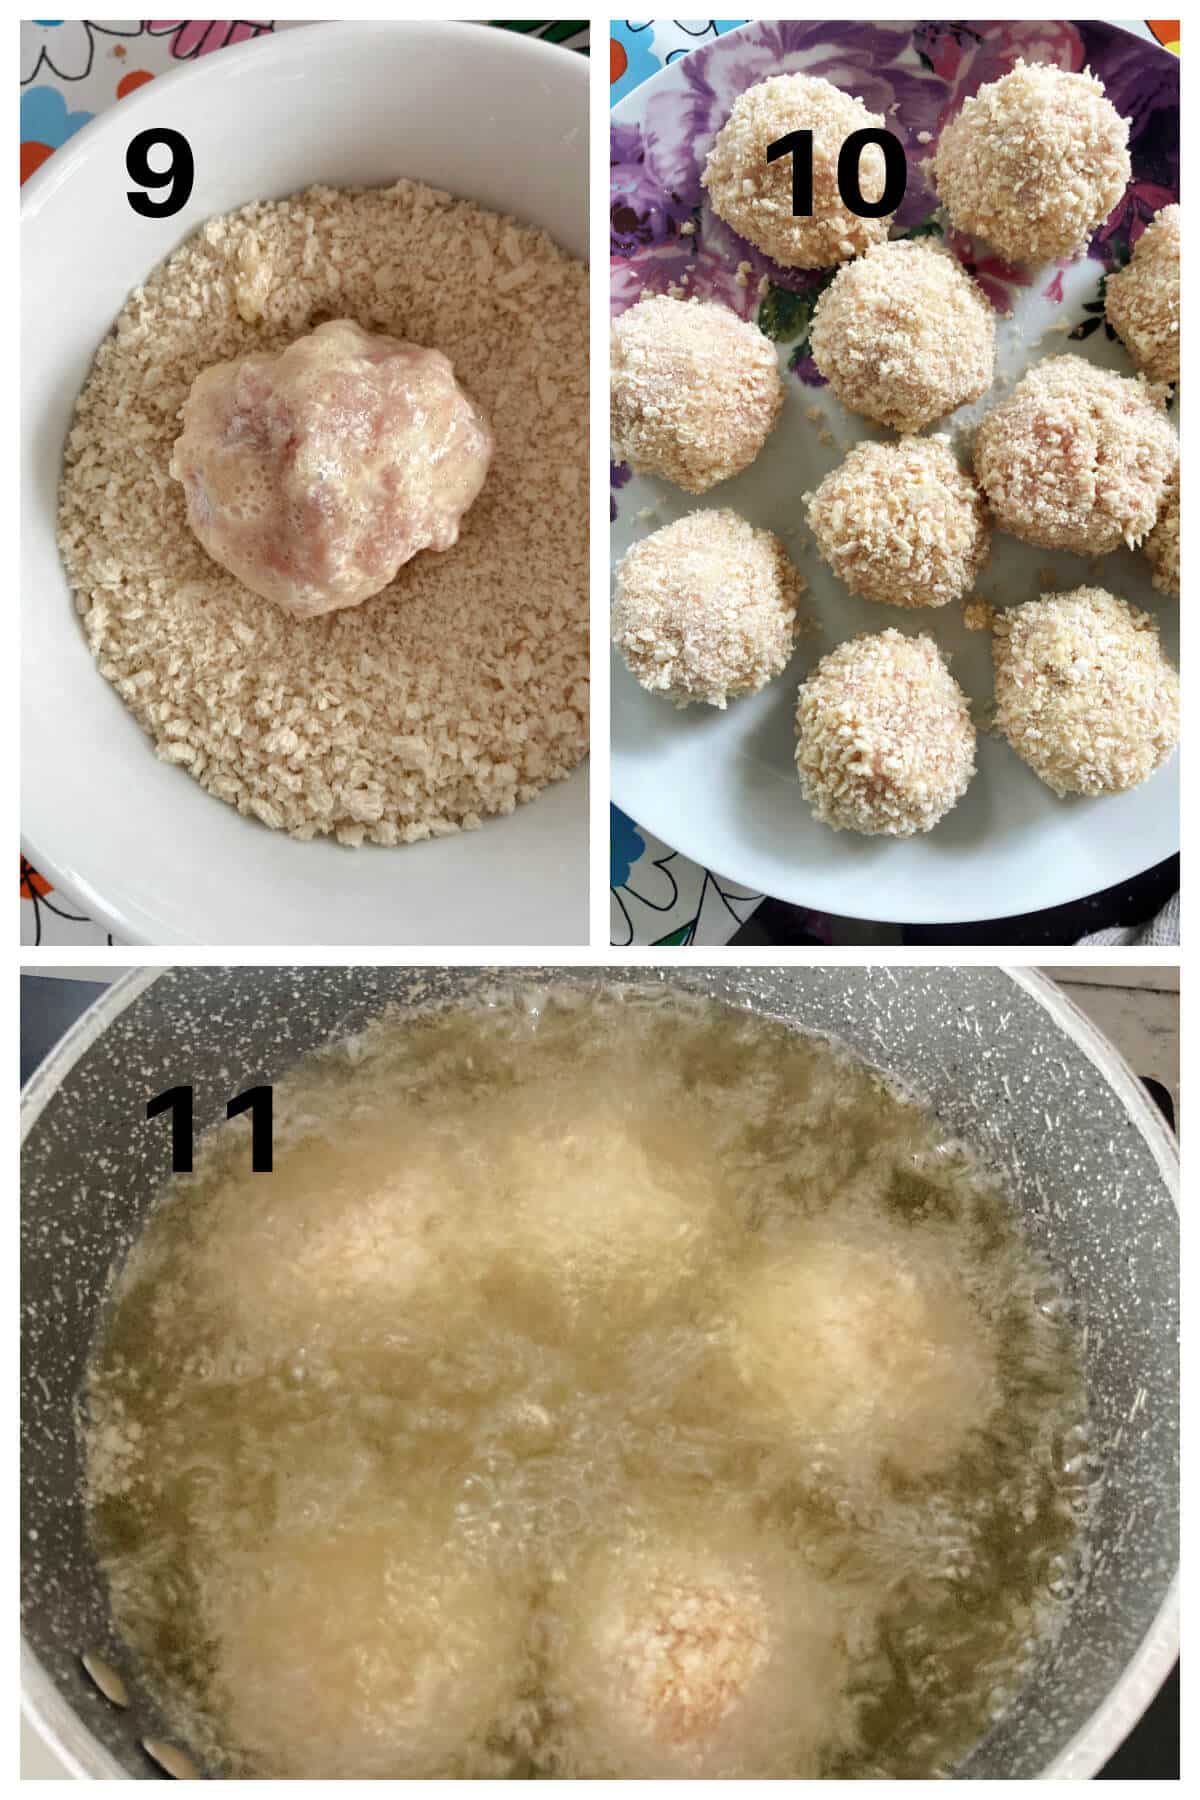 Collage of 3 photos to show how to make the chicken kiev balls.